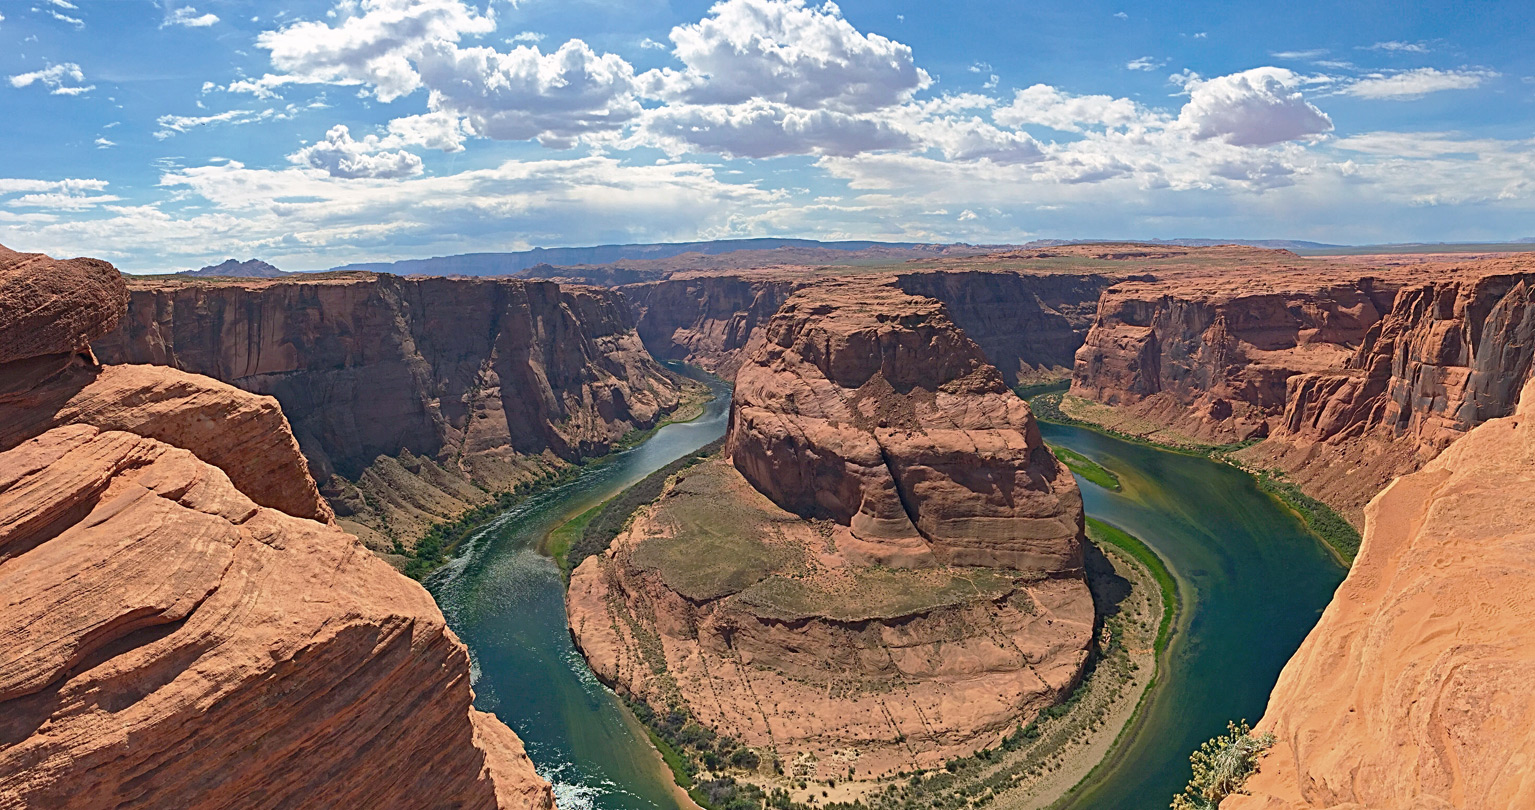 Sunny day at the overlook: Horseshoe Bend, Glen Canyon National